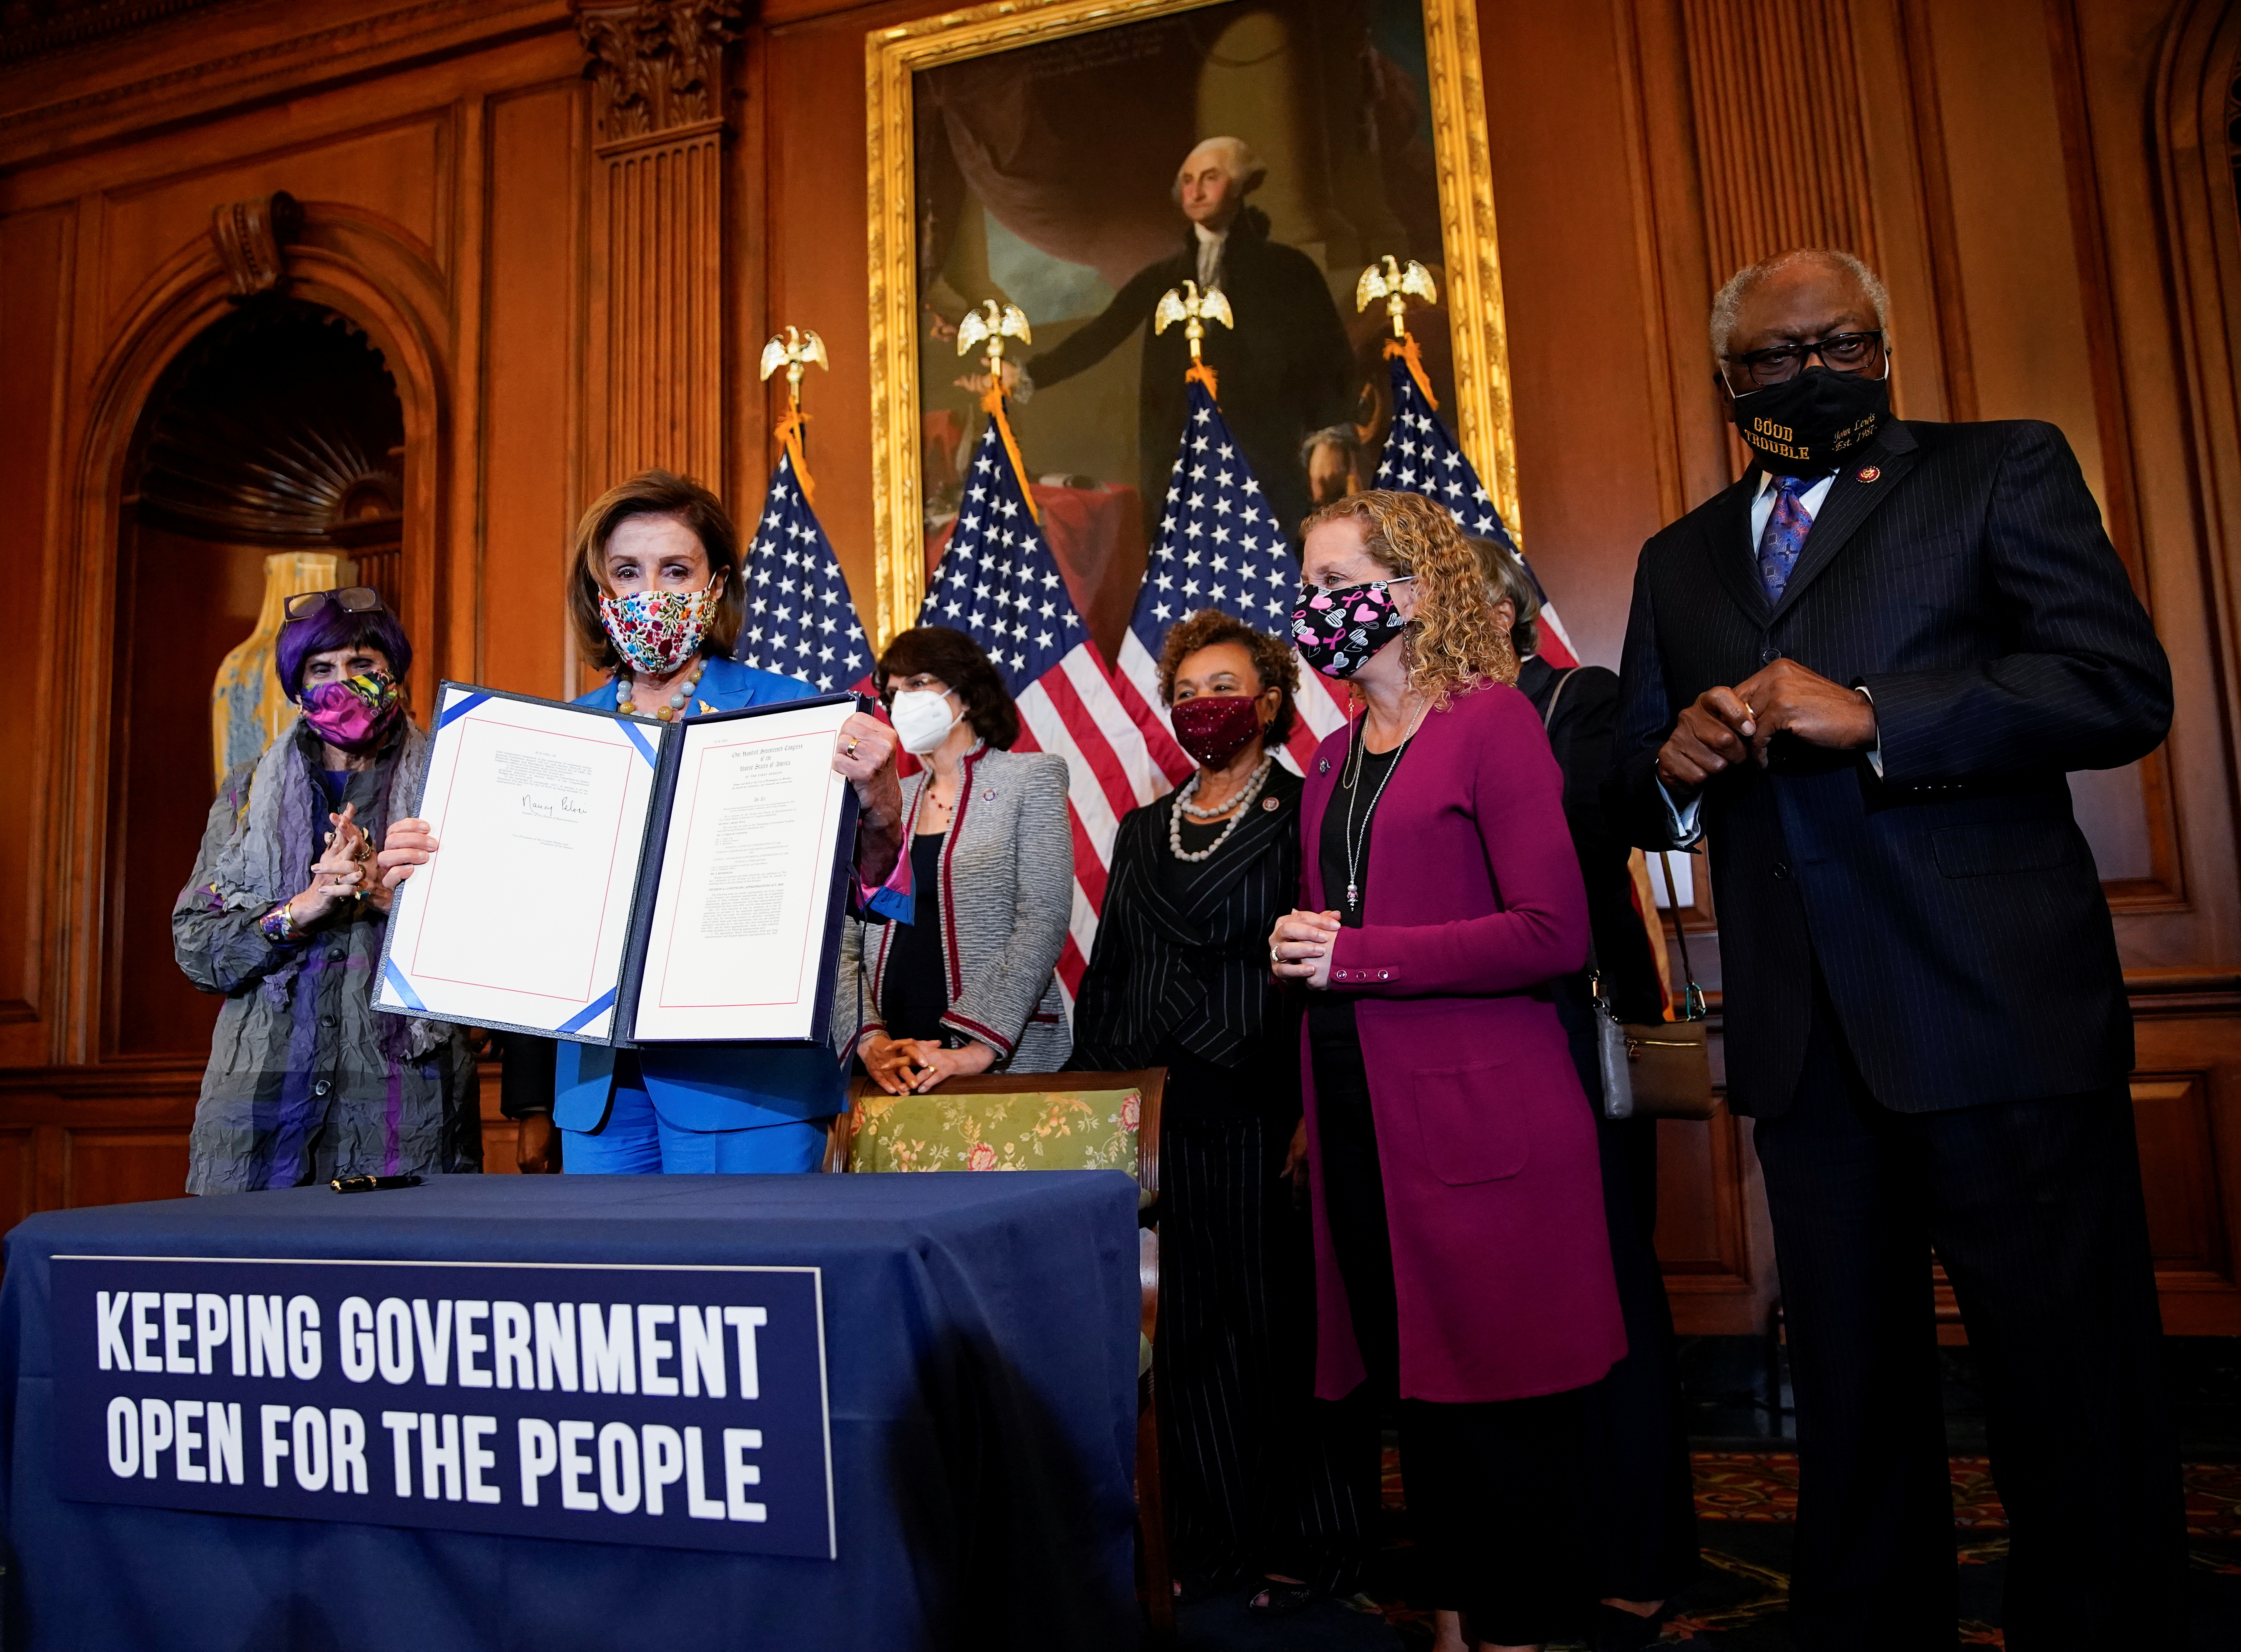 U.S. House Speaker Nancy Pelosi signs continuing resolution during bill enrollment ceremony on Capitol Hill in Washington